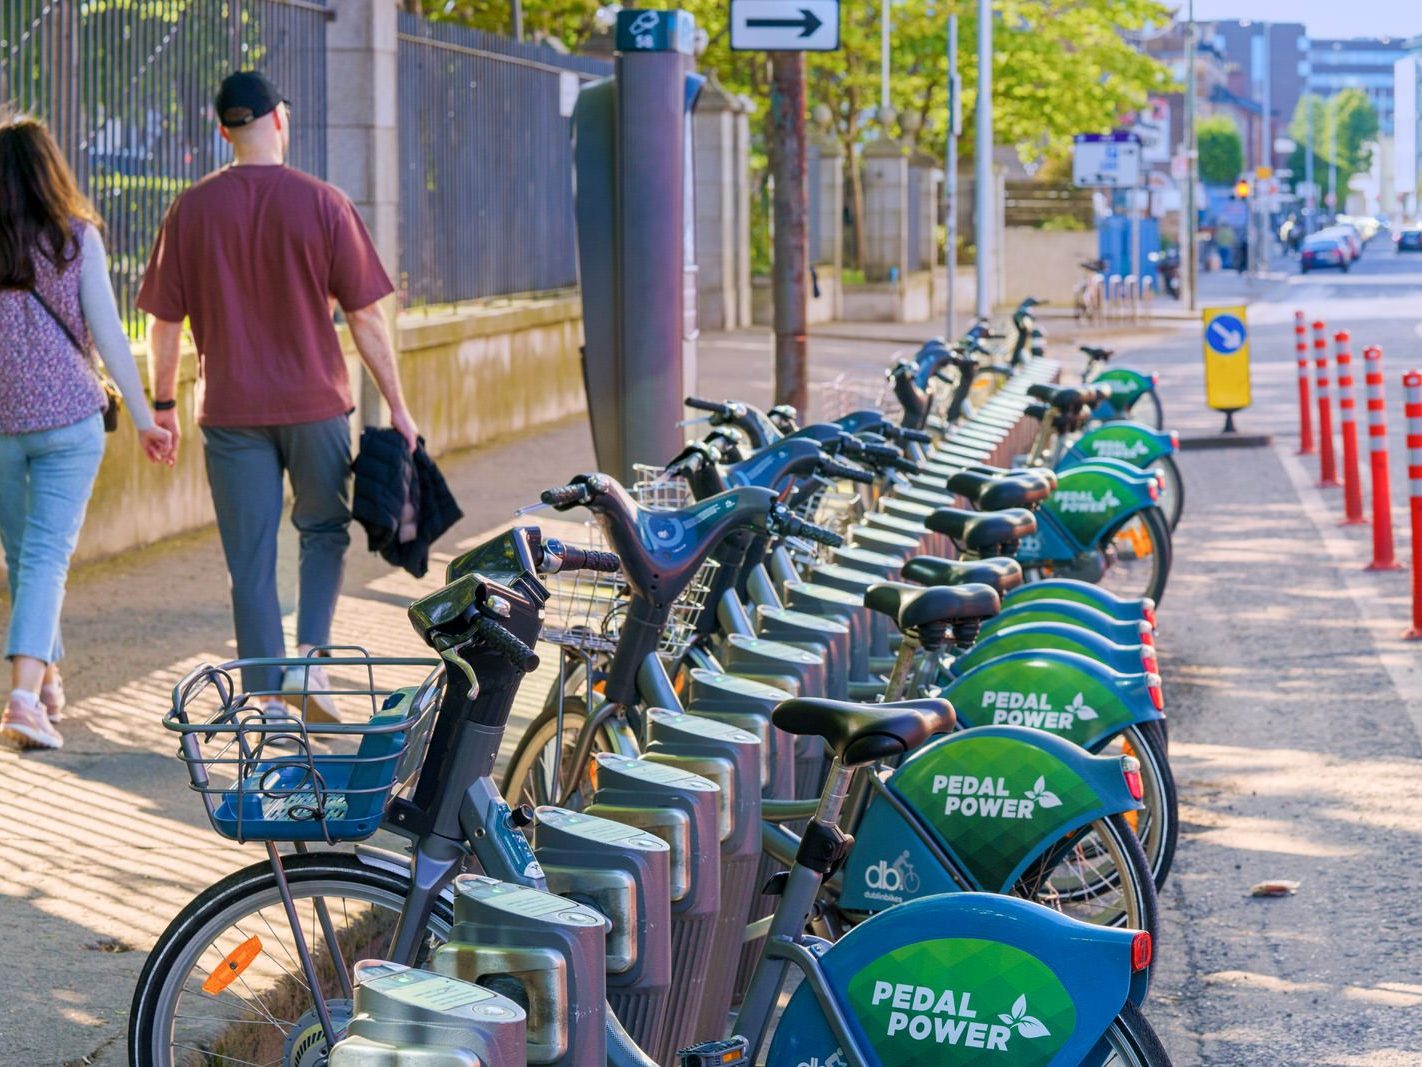 DUBLINBIKES DOCKING STATION 58 [UPPER GRAND CANAL STREET CLOSE TO LOVE LANE]-232427-1